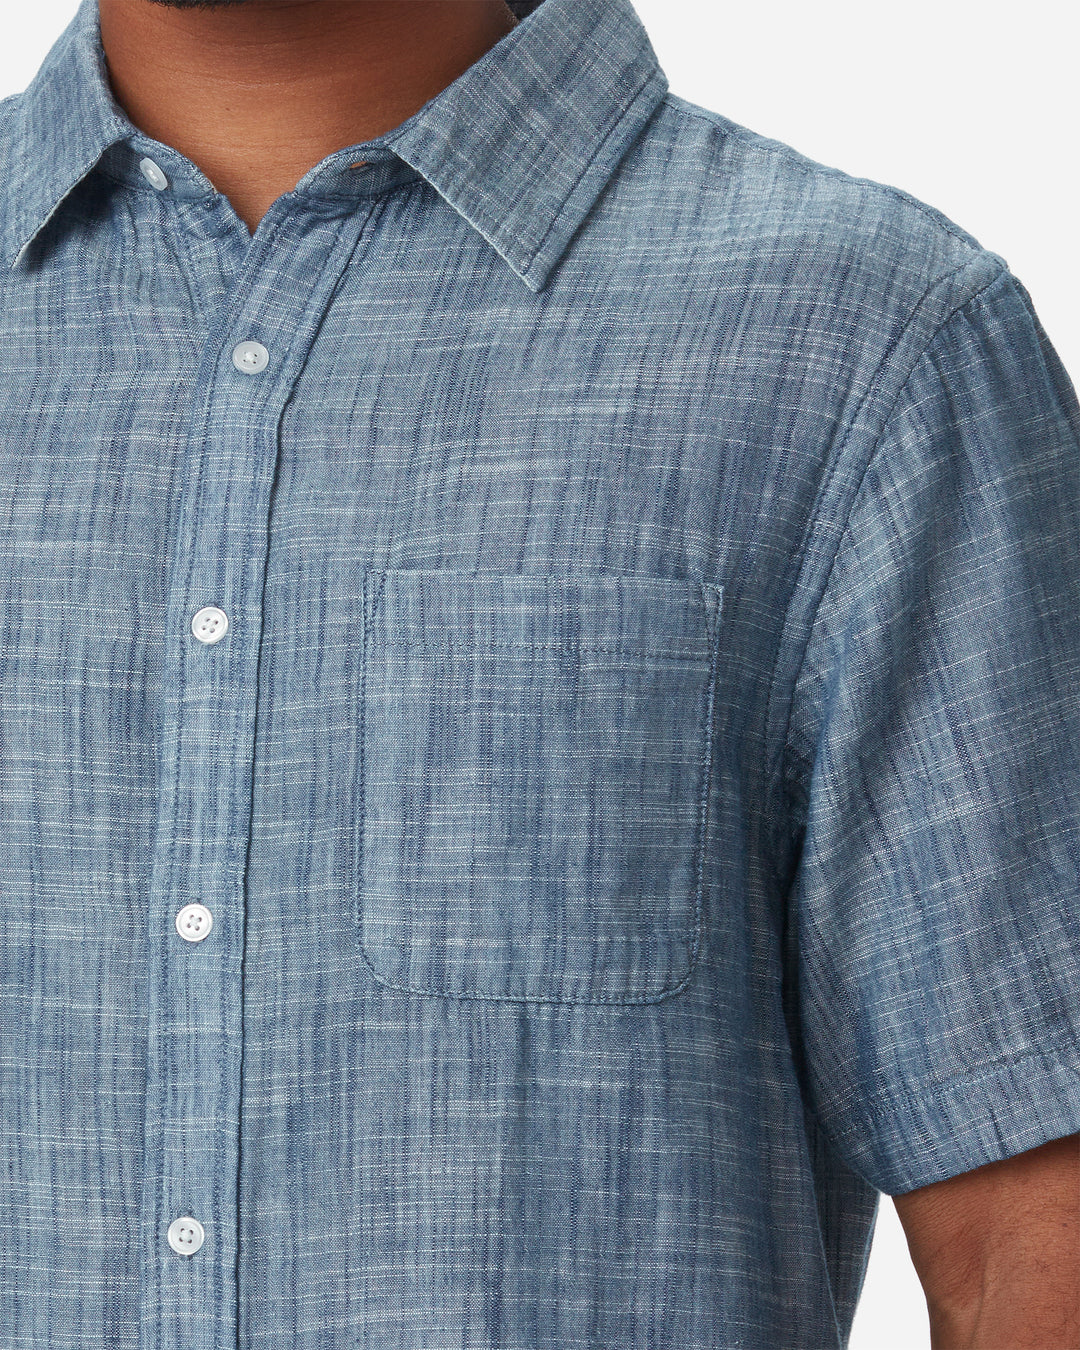 Zoom in of neck, pocket, buttons, and collar of model wearing Ace Rivington short-sleeved indigo slub soft textured-cotton shirt with linen hand feel, pearl buttons, left-breast pocket, collar, and off white interior